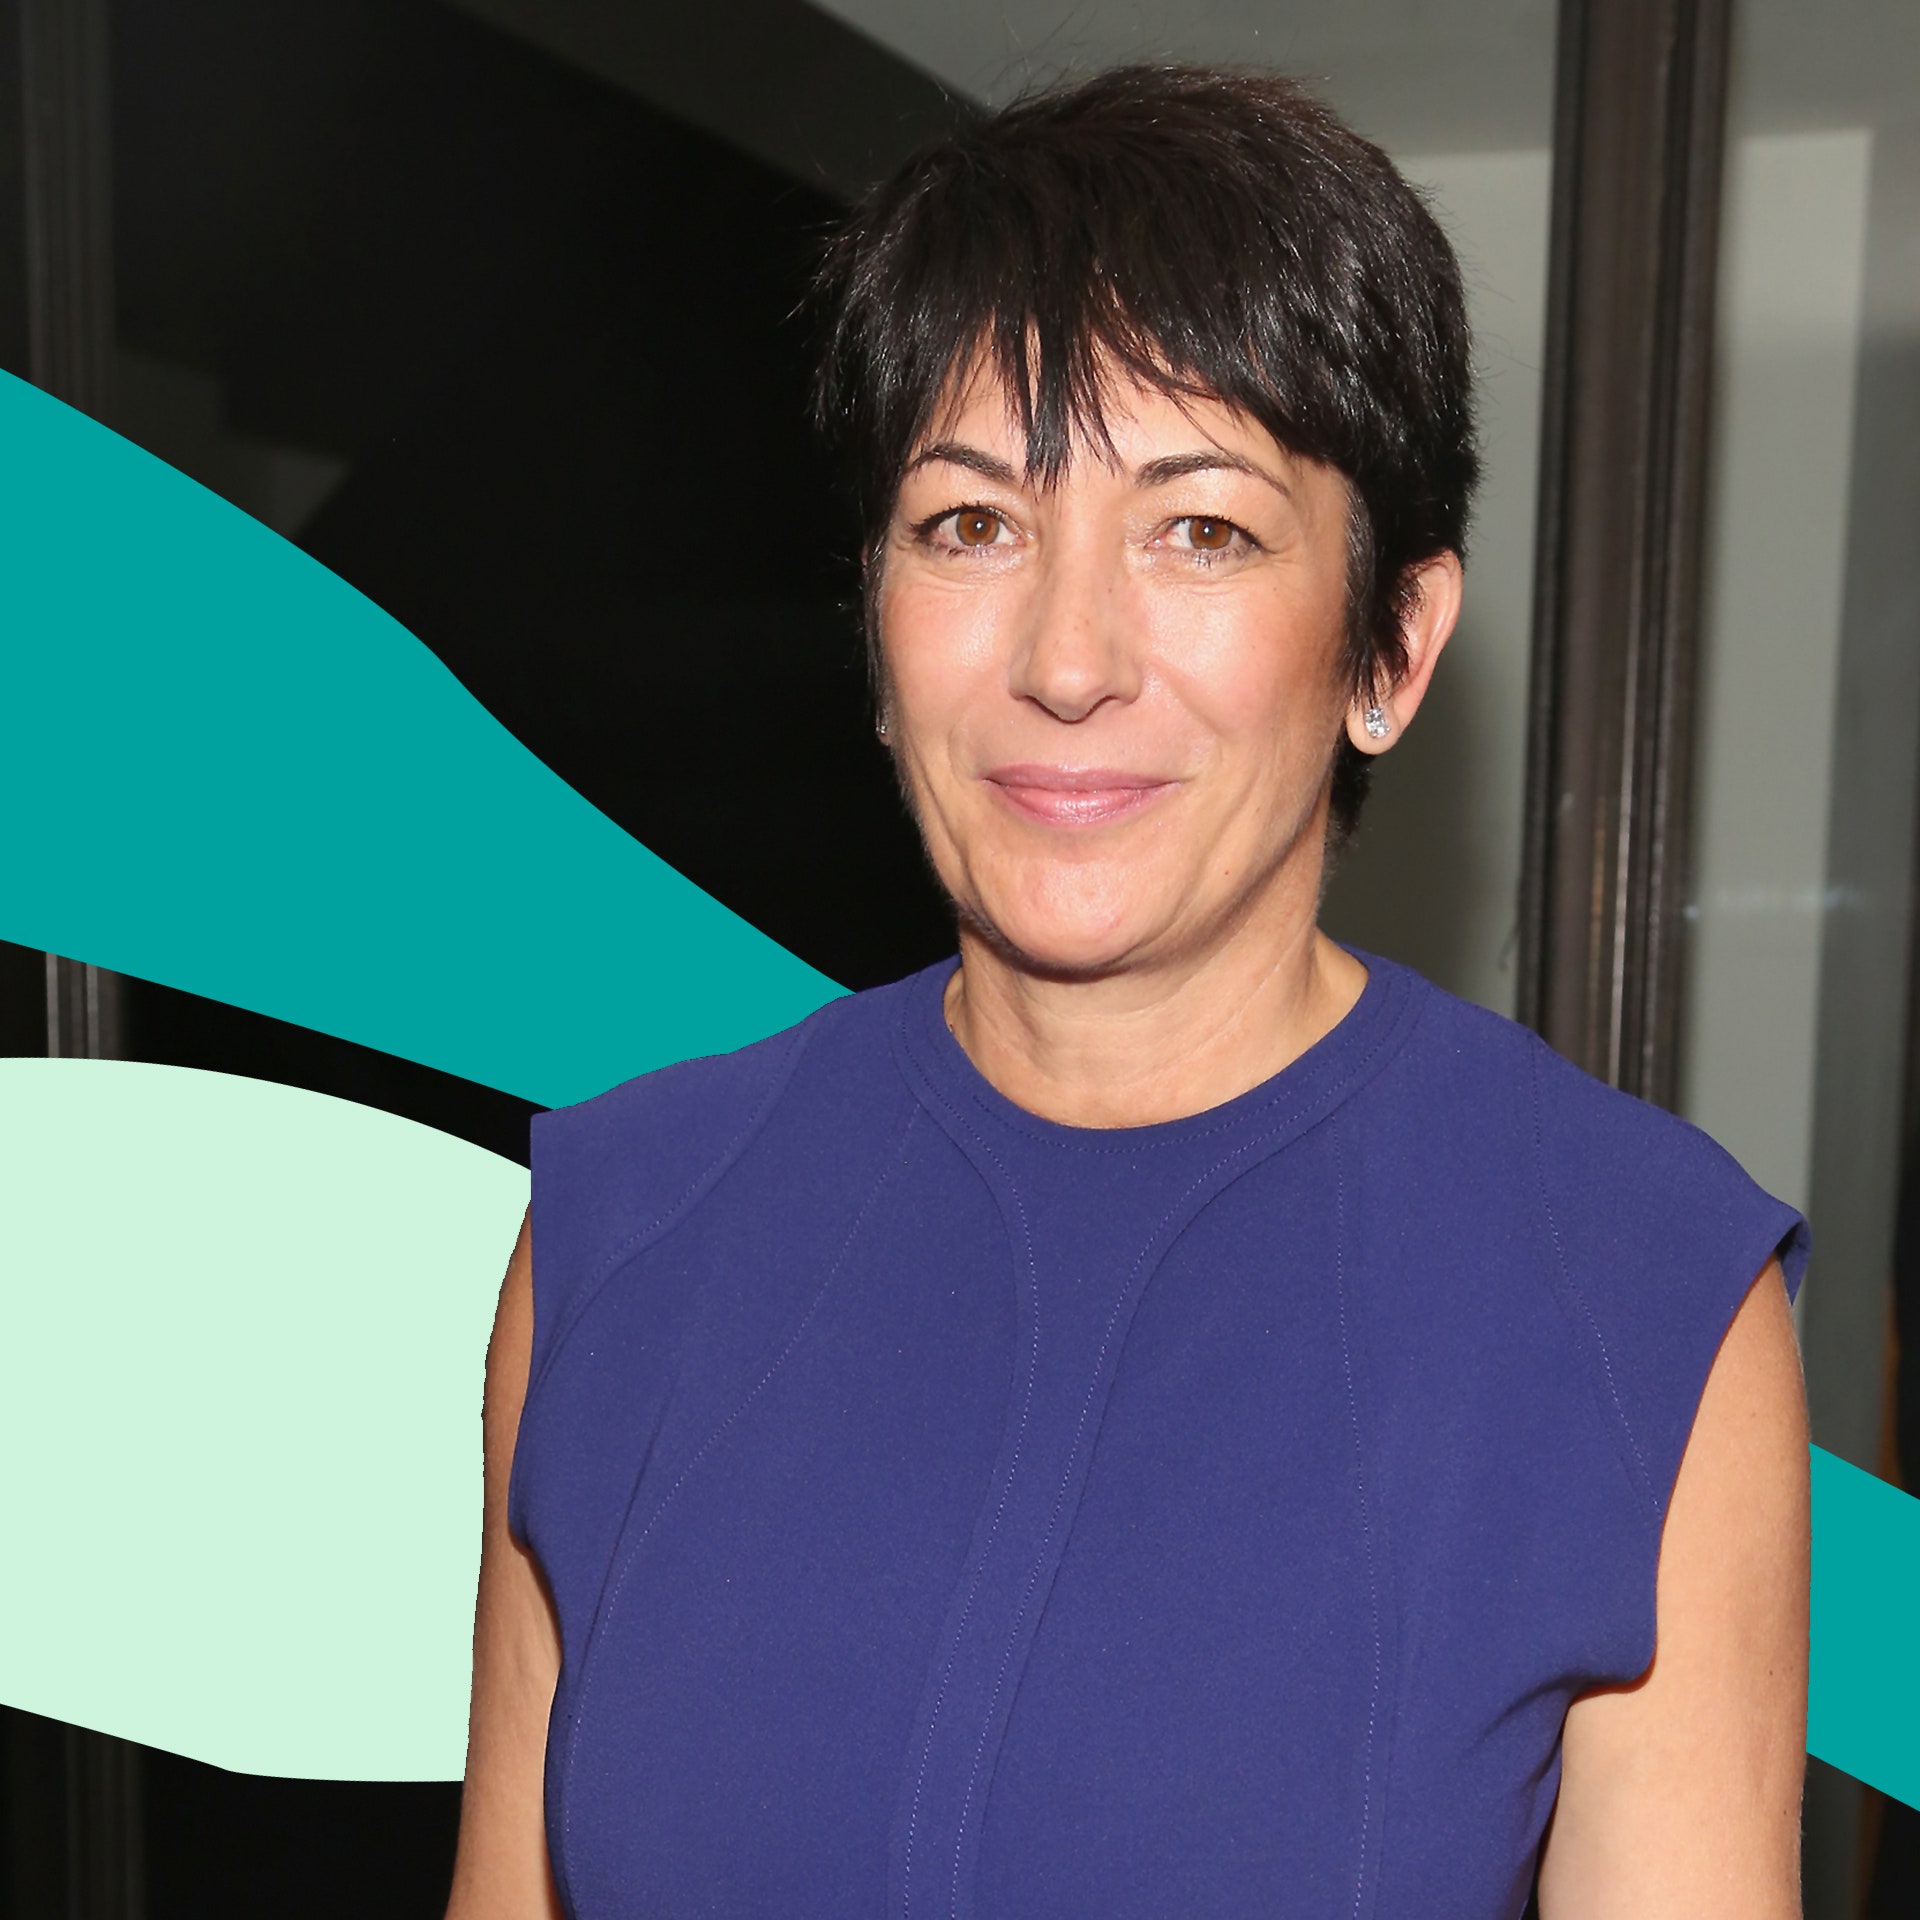 As Ghislaine Maxwell is sentenced to 20 years for her role in Jeffrey Epstein abuse, here's everything we know about the disgraced media heiress